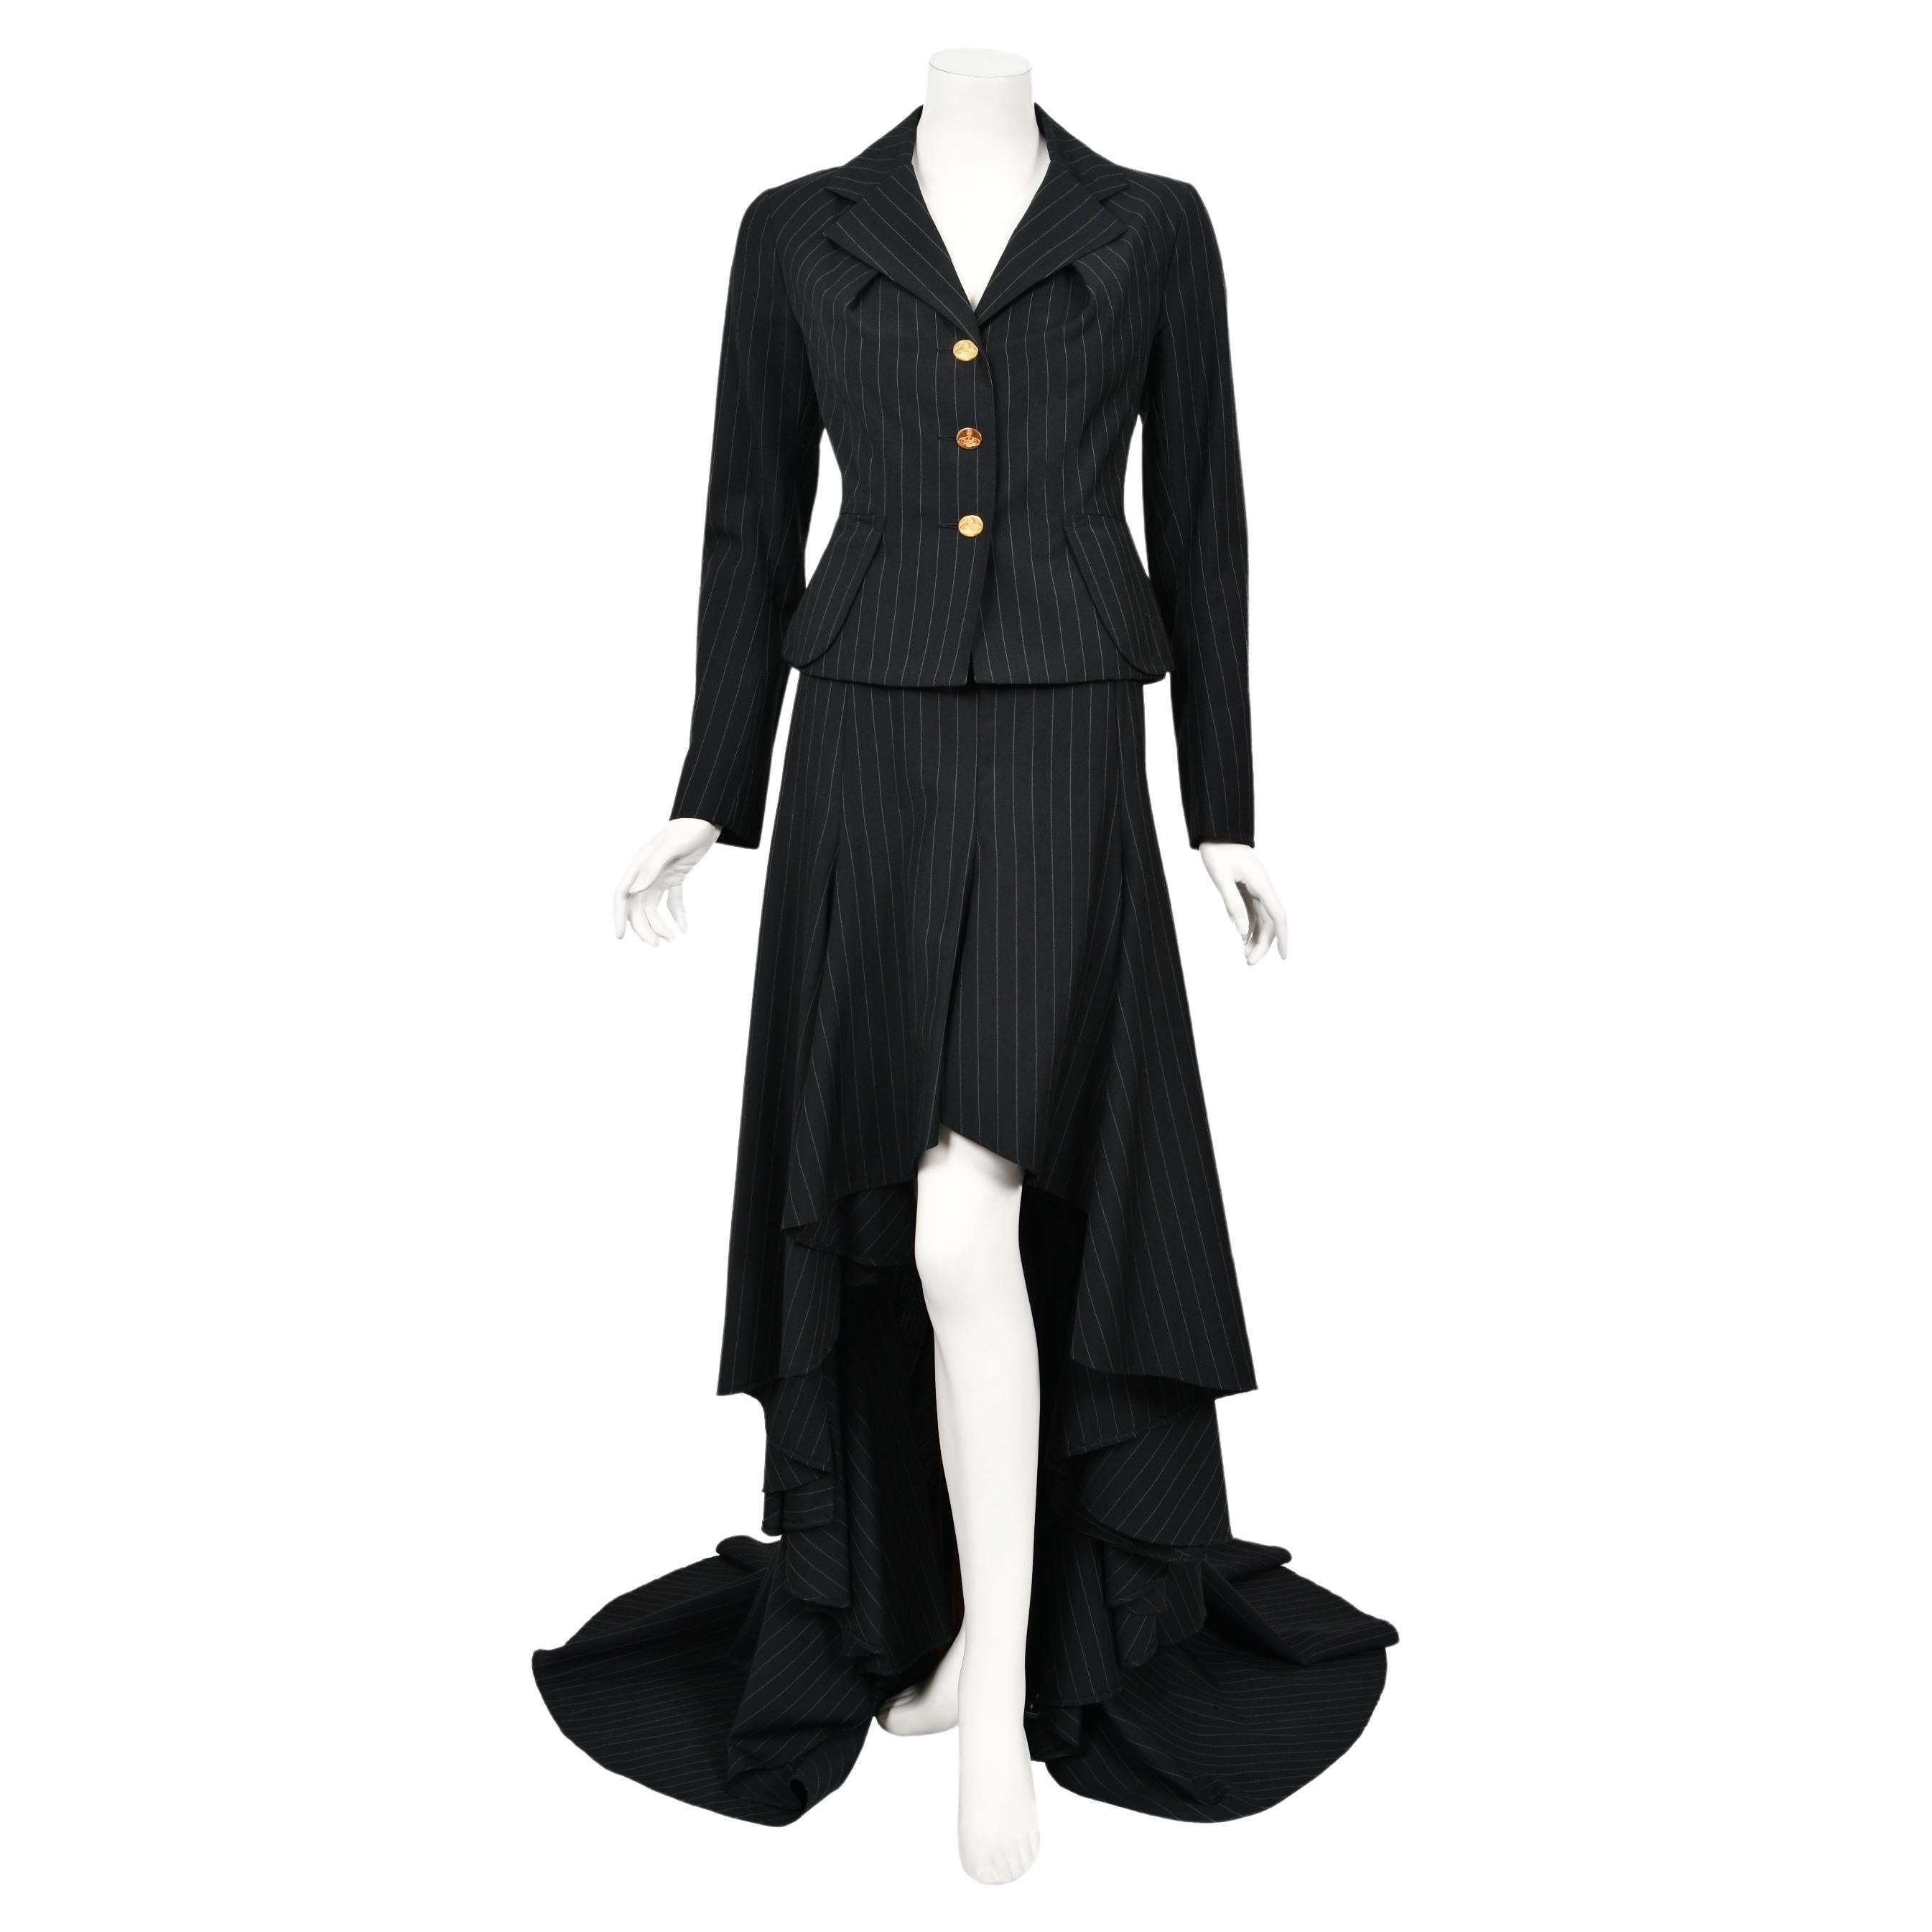 Archival 1994 Vivienne Westwood Pinstripe Wool Jacket and High-Low Trained Skirt For Sale